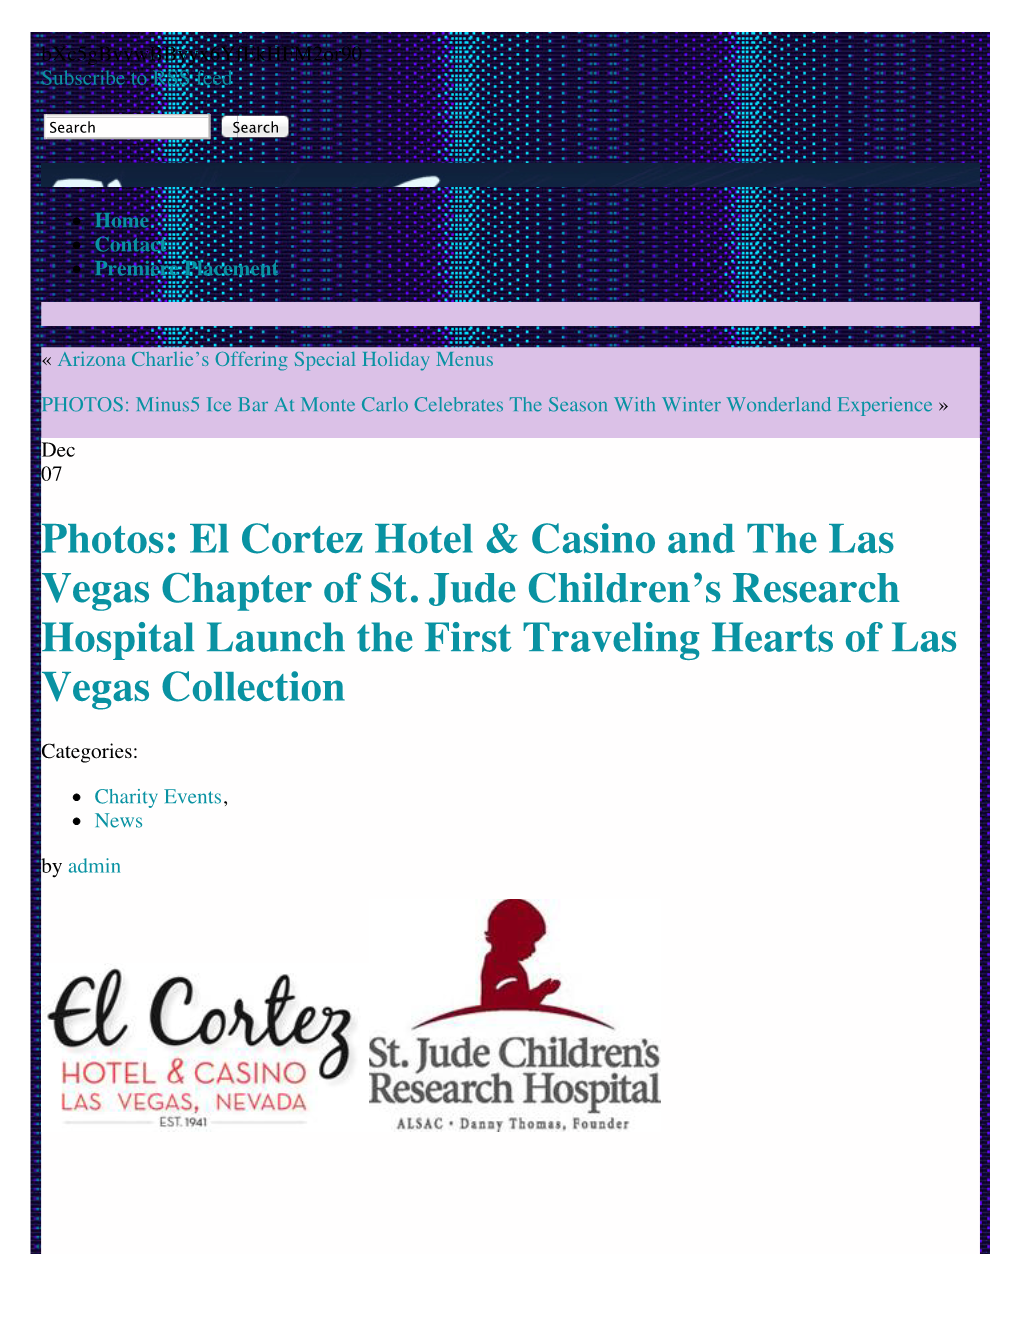 Photos: El Cortez Hotel & Casino and the Las Vegas Chapter of St